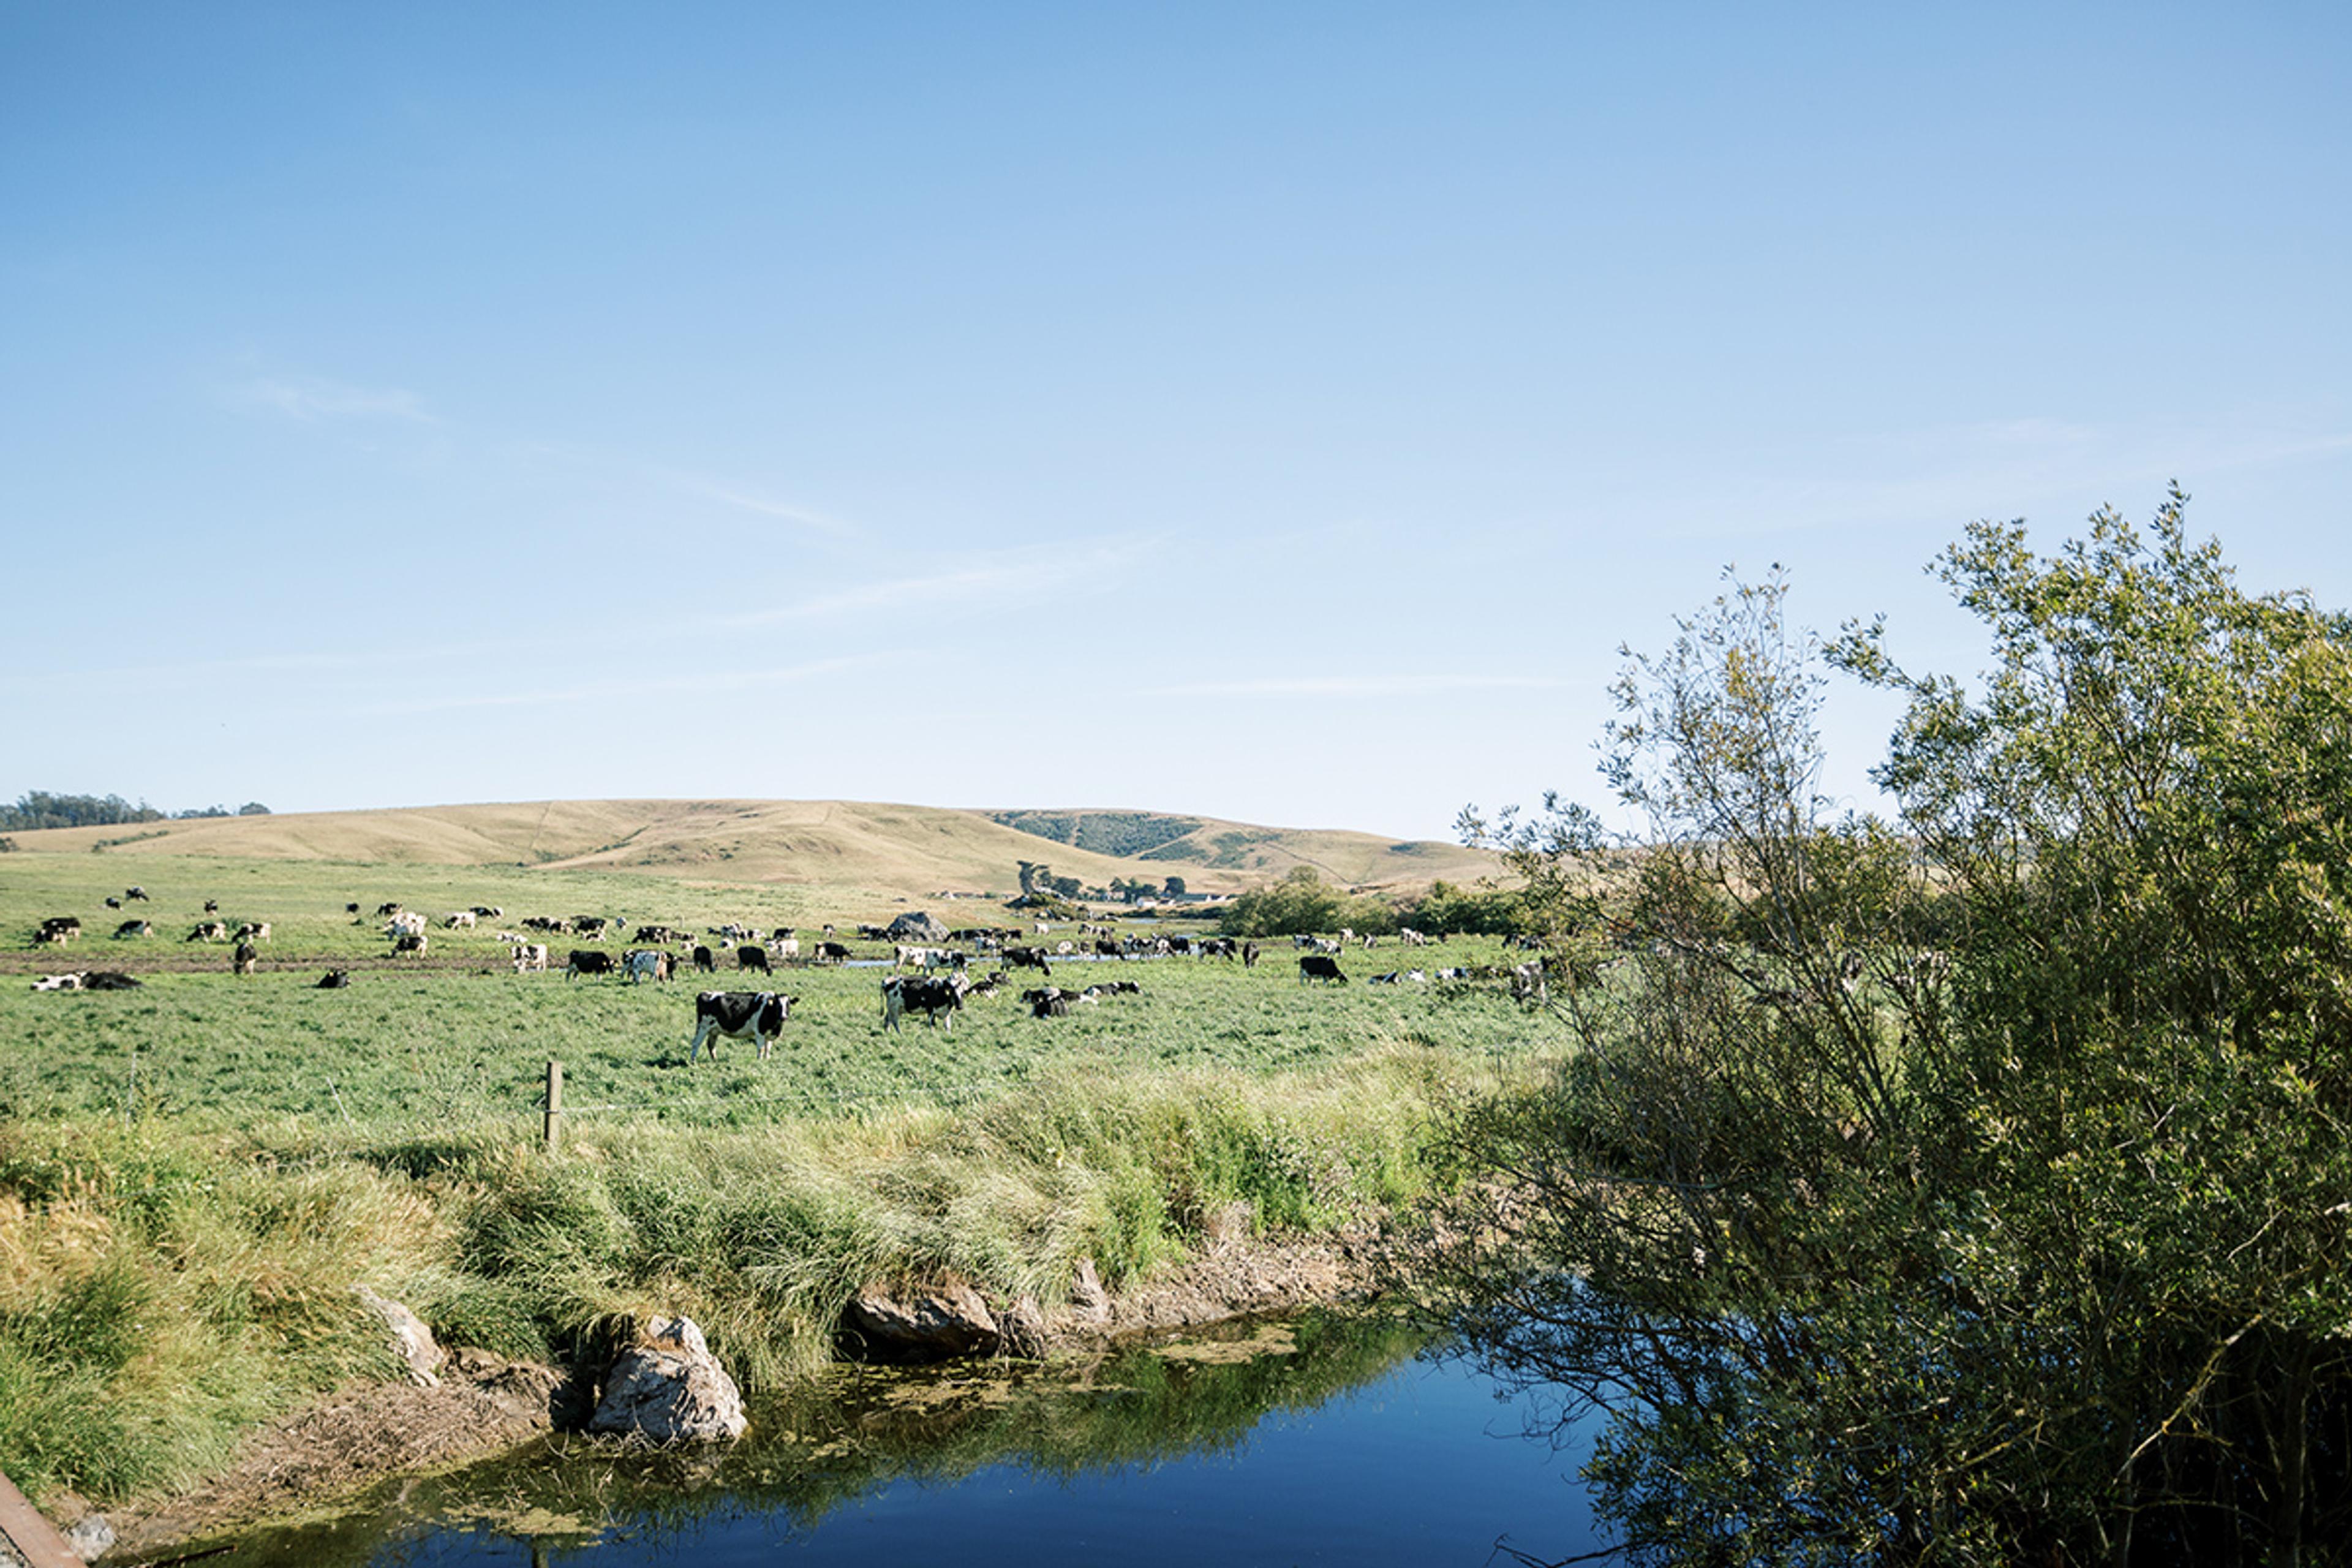 A stream in the foreground with cows grazing a lush green pasture nearby, against a clear blue sky. 